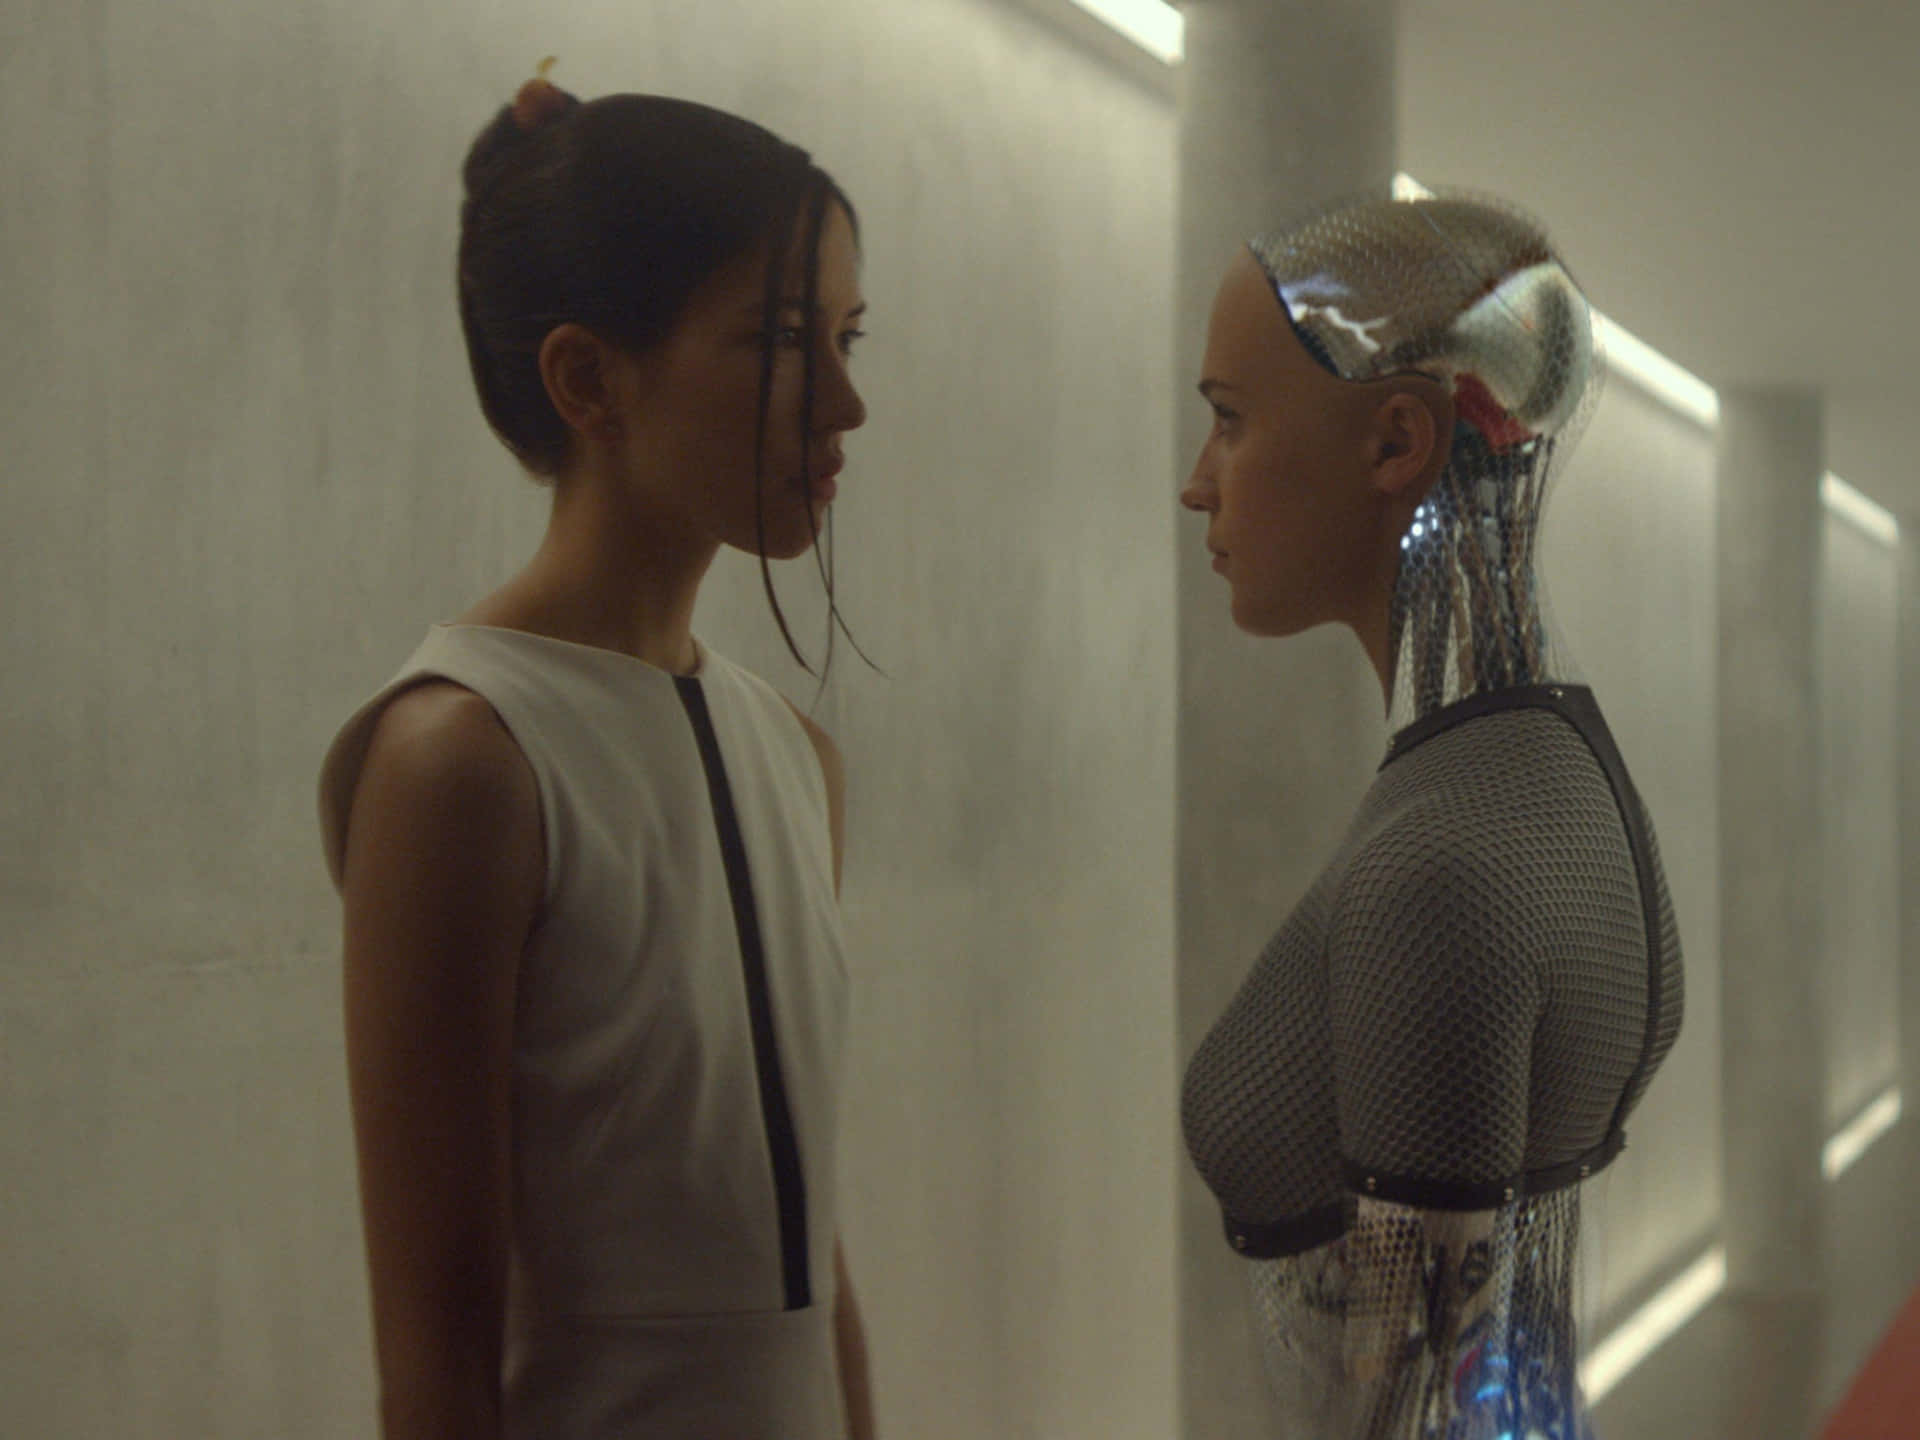 1440x900 / 1440x900 ex machina computer background - Coolwallpapers.me!